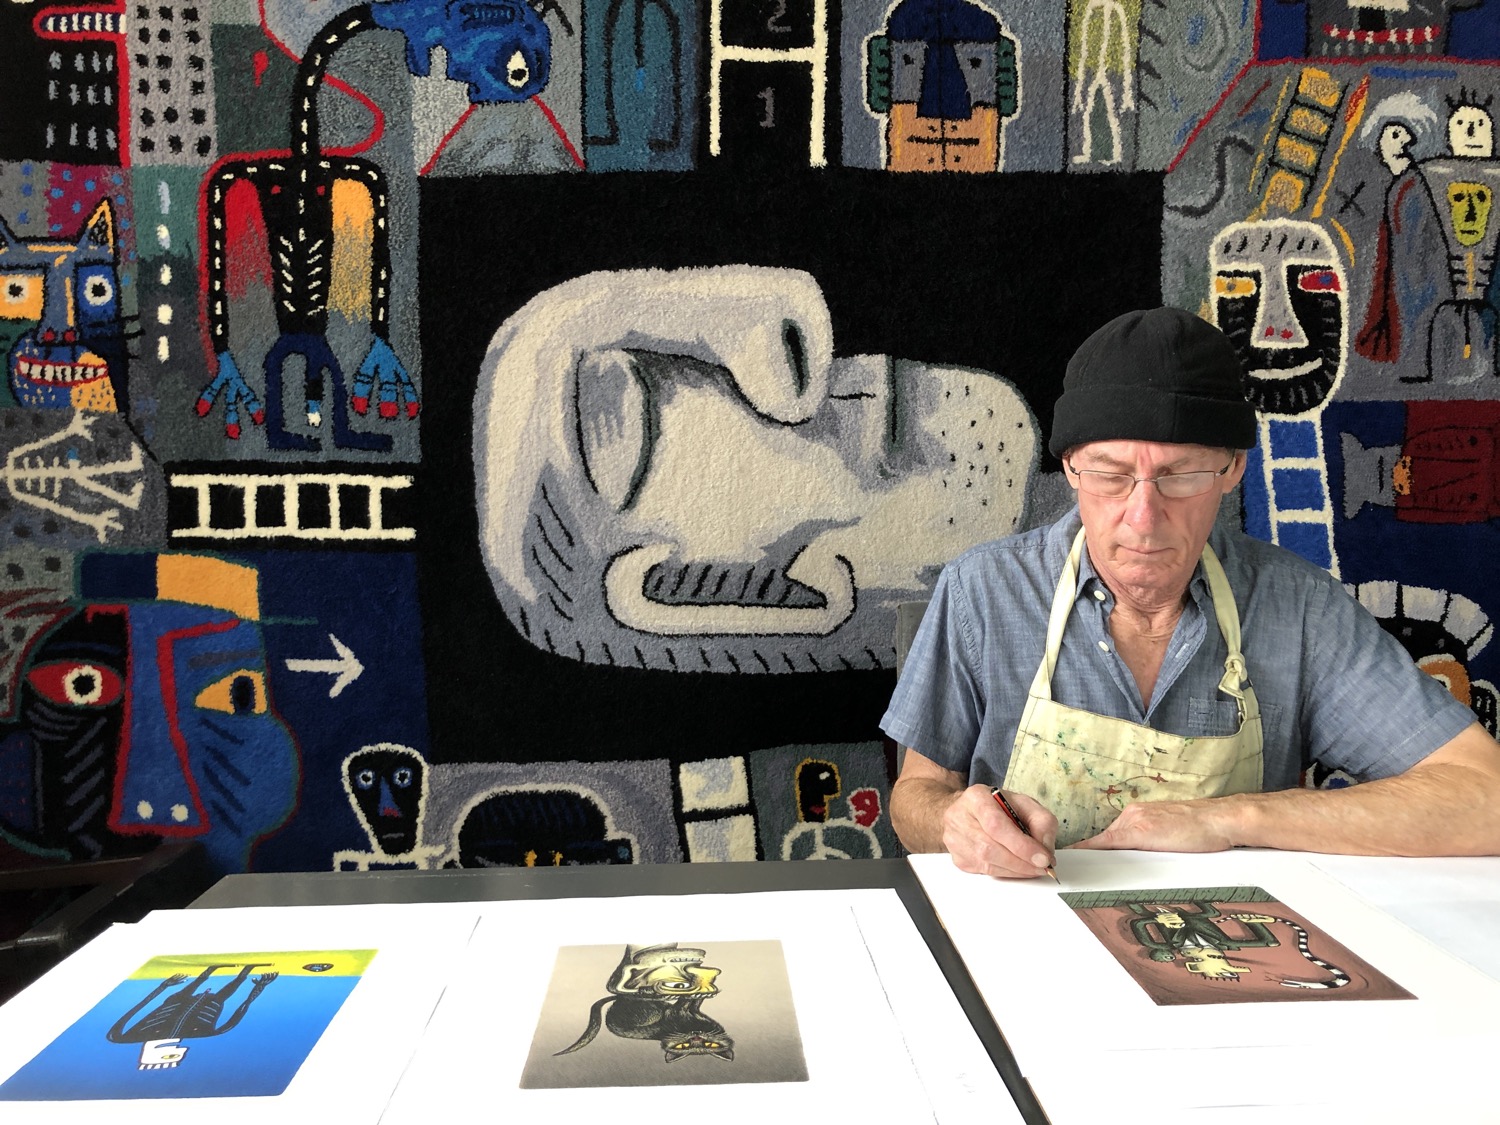 Limited edition lithographs by a leading South African artist who is a master at using the full potential of what lithography provides in colour and line.